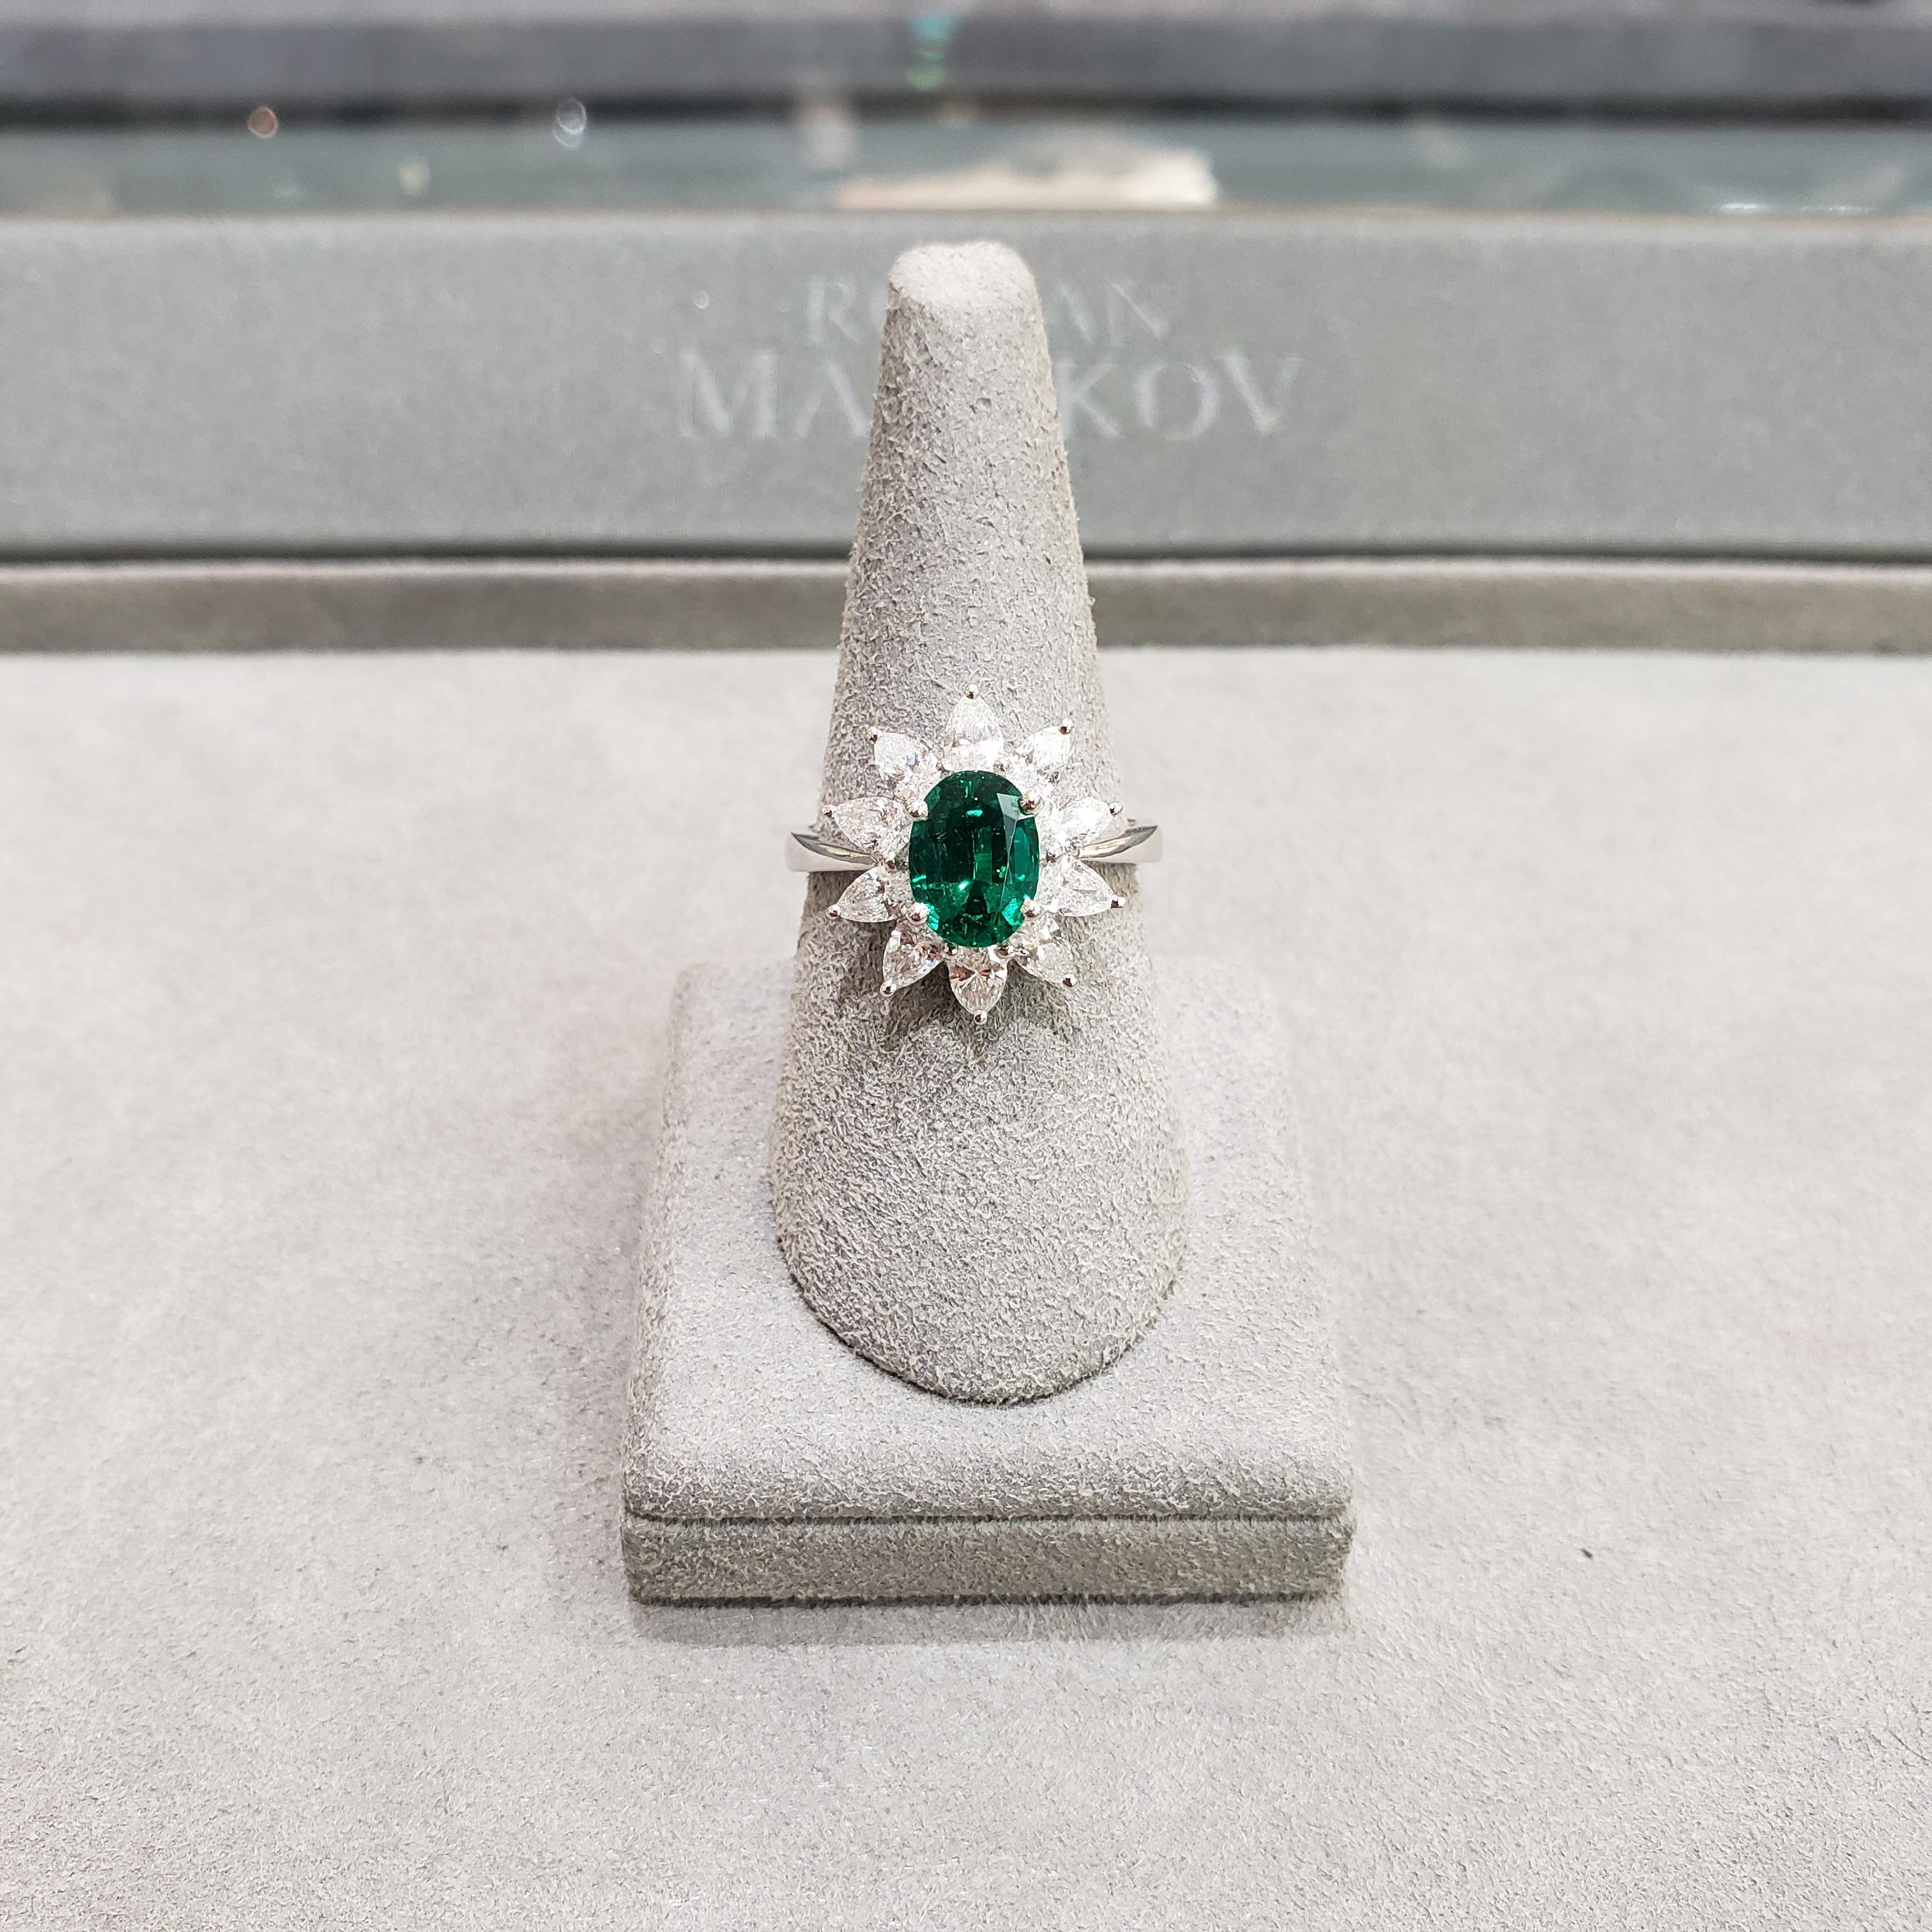 A stunning engagement ring, showcasing a color-rich 1.48 carats oval cut green emerald that is elegantly framed by 10 sparkling pear-shape diamonds of 1.06 carats total in a floral motif style. Mounted in solid 18K white gold. Size 6.5 US, resizable